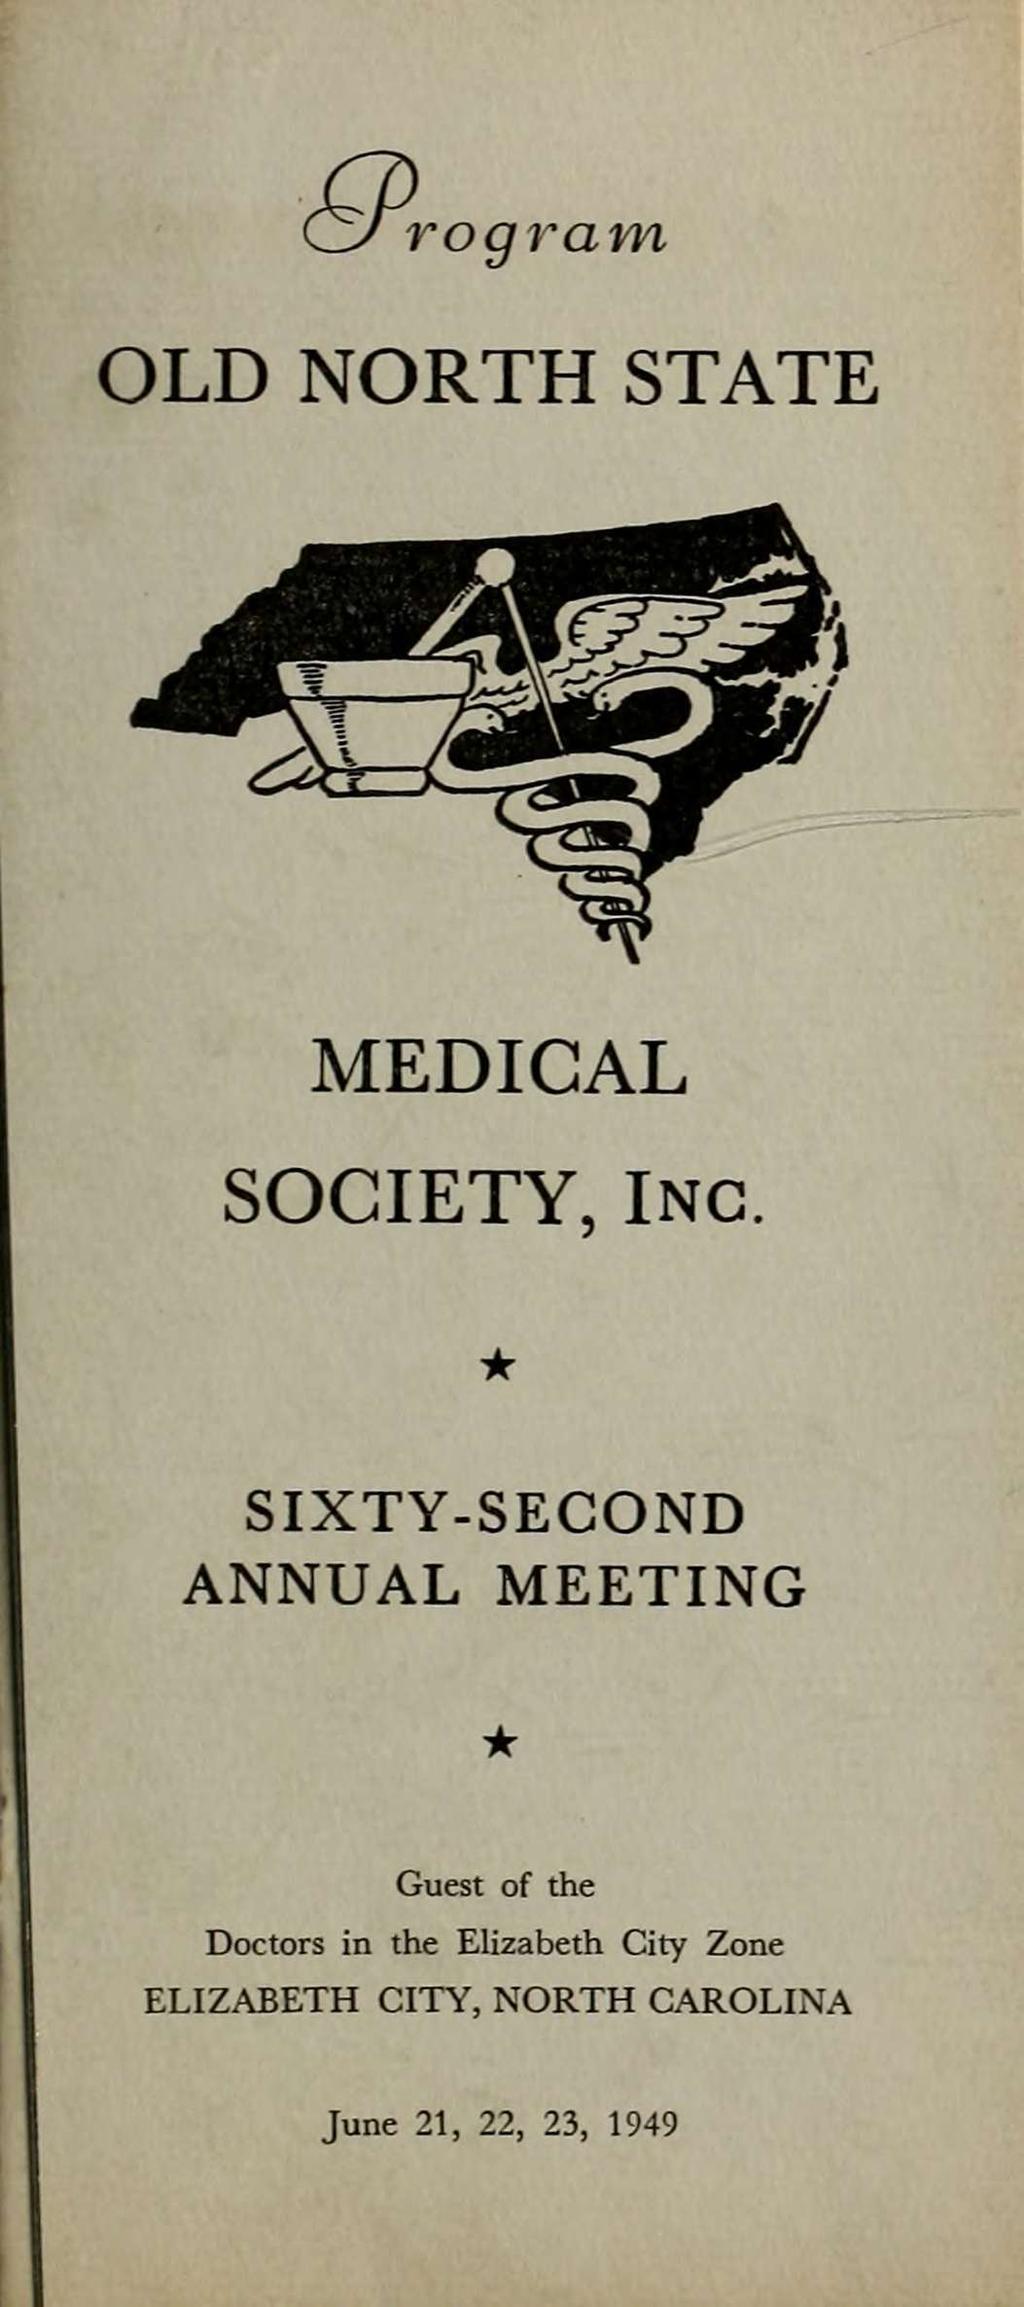 rogram OLD NORTH STATE MEDICAL SOCIETY, inc SIXTY-SECOND ANNUAL MEETING Guest of the